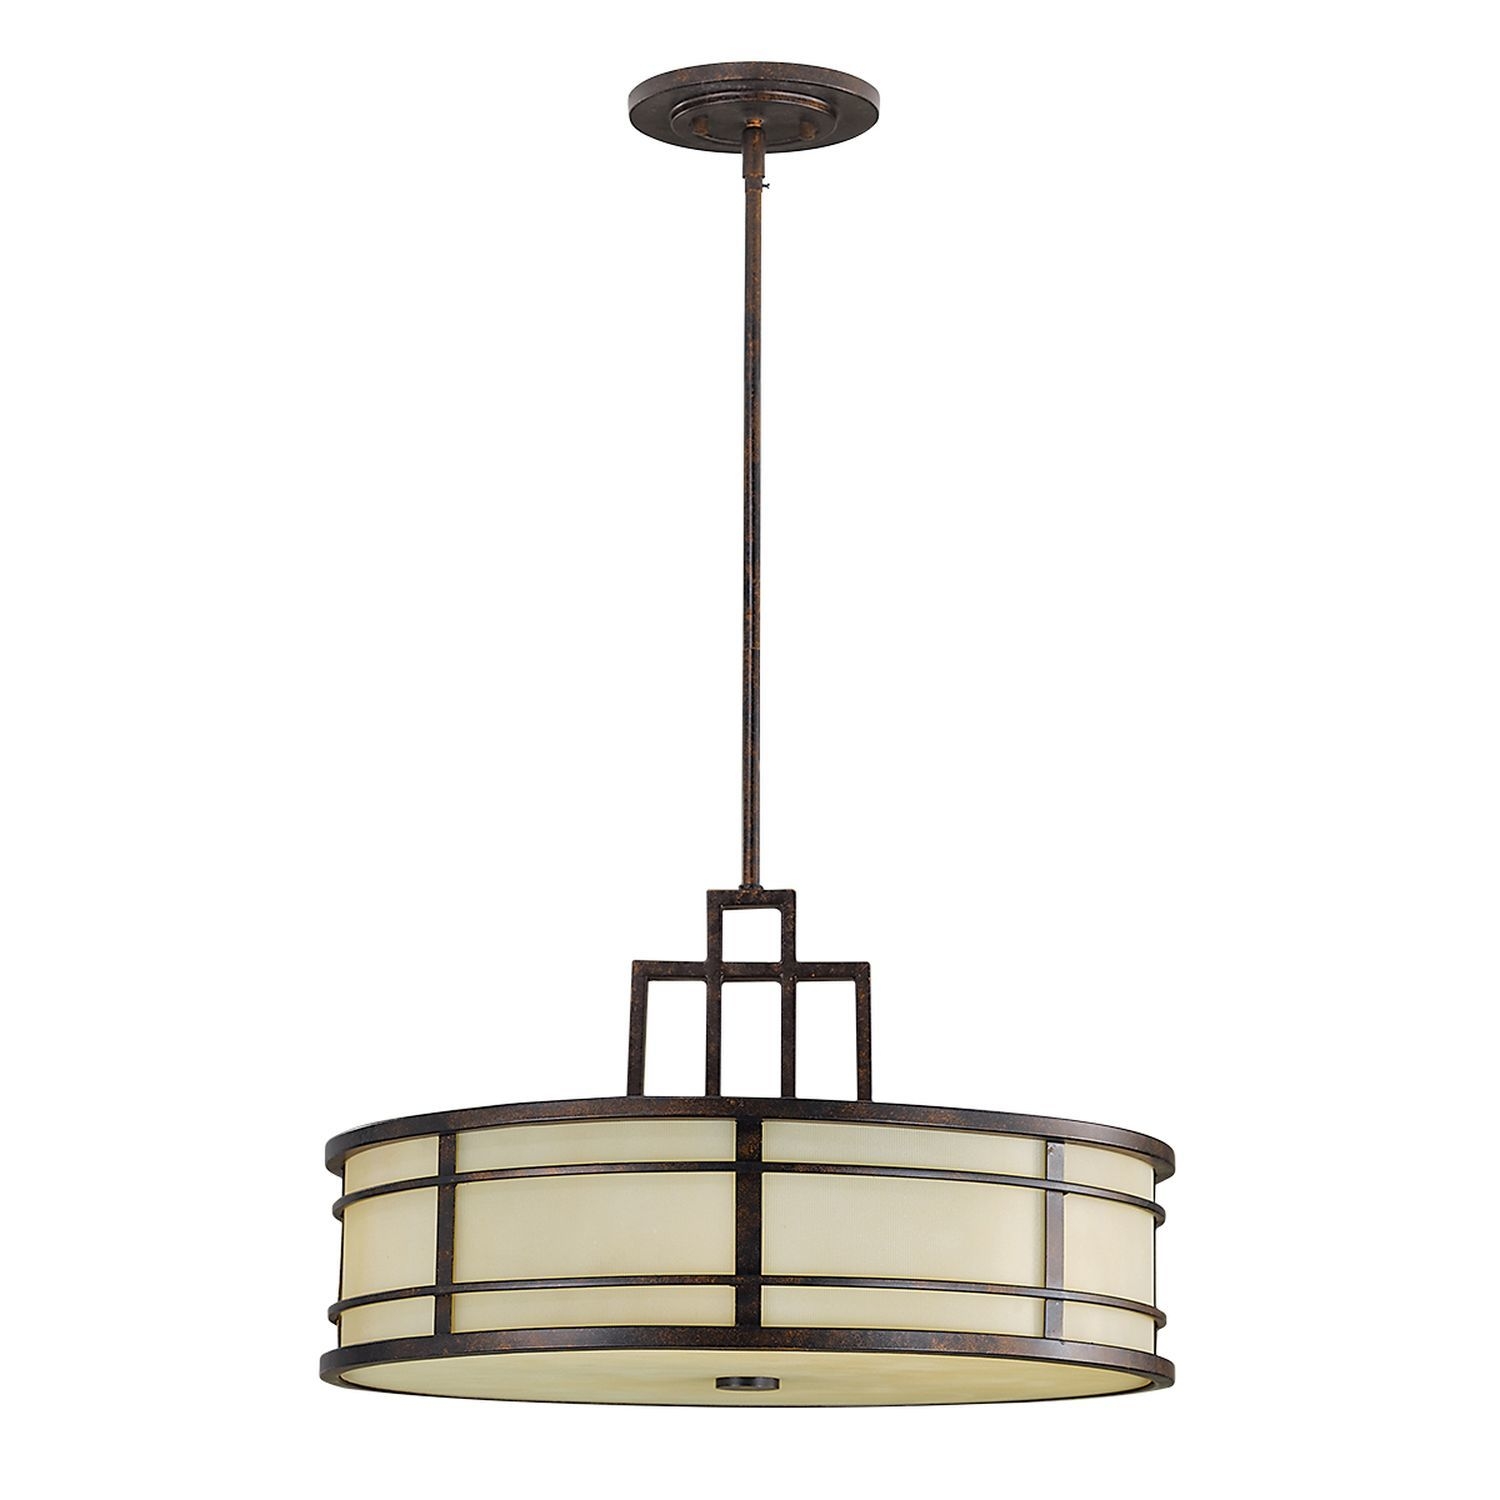 86 frank lloyd wright furniture style lighting products